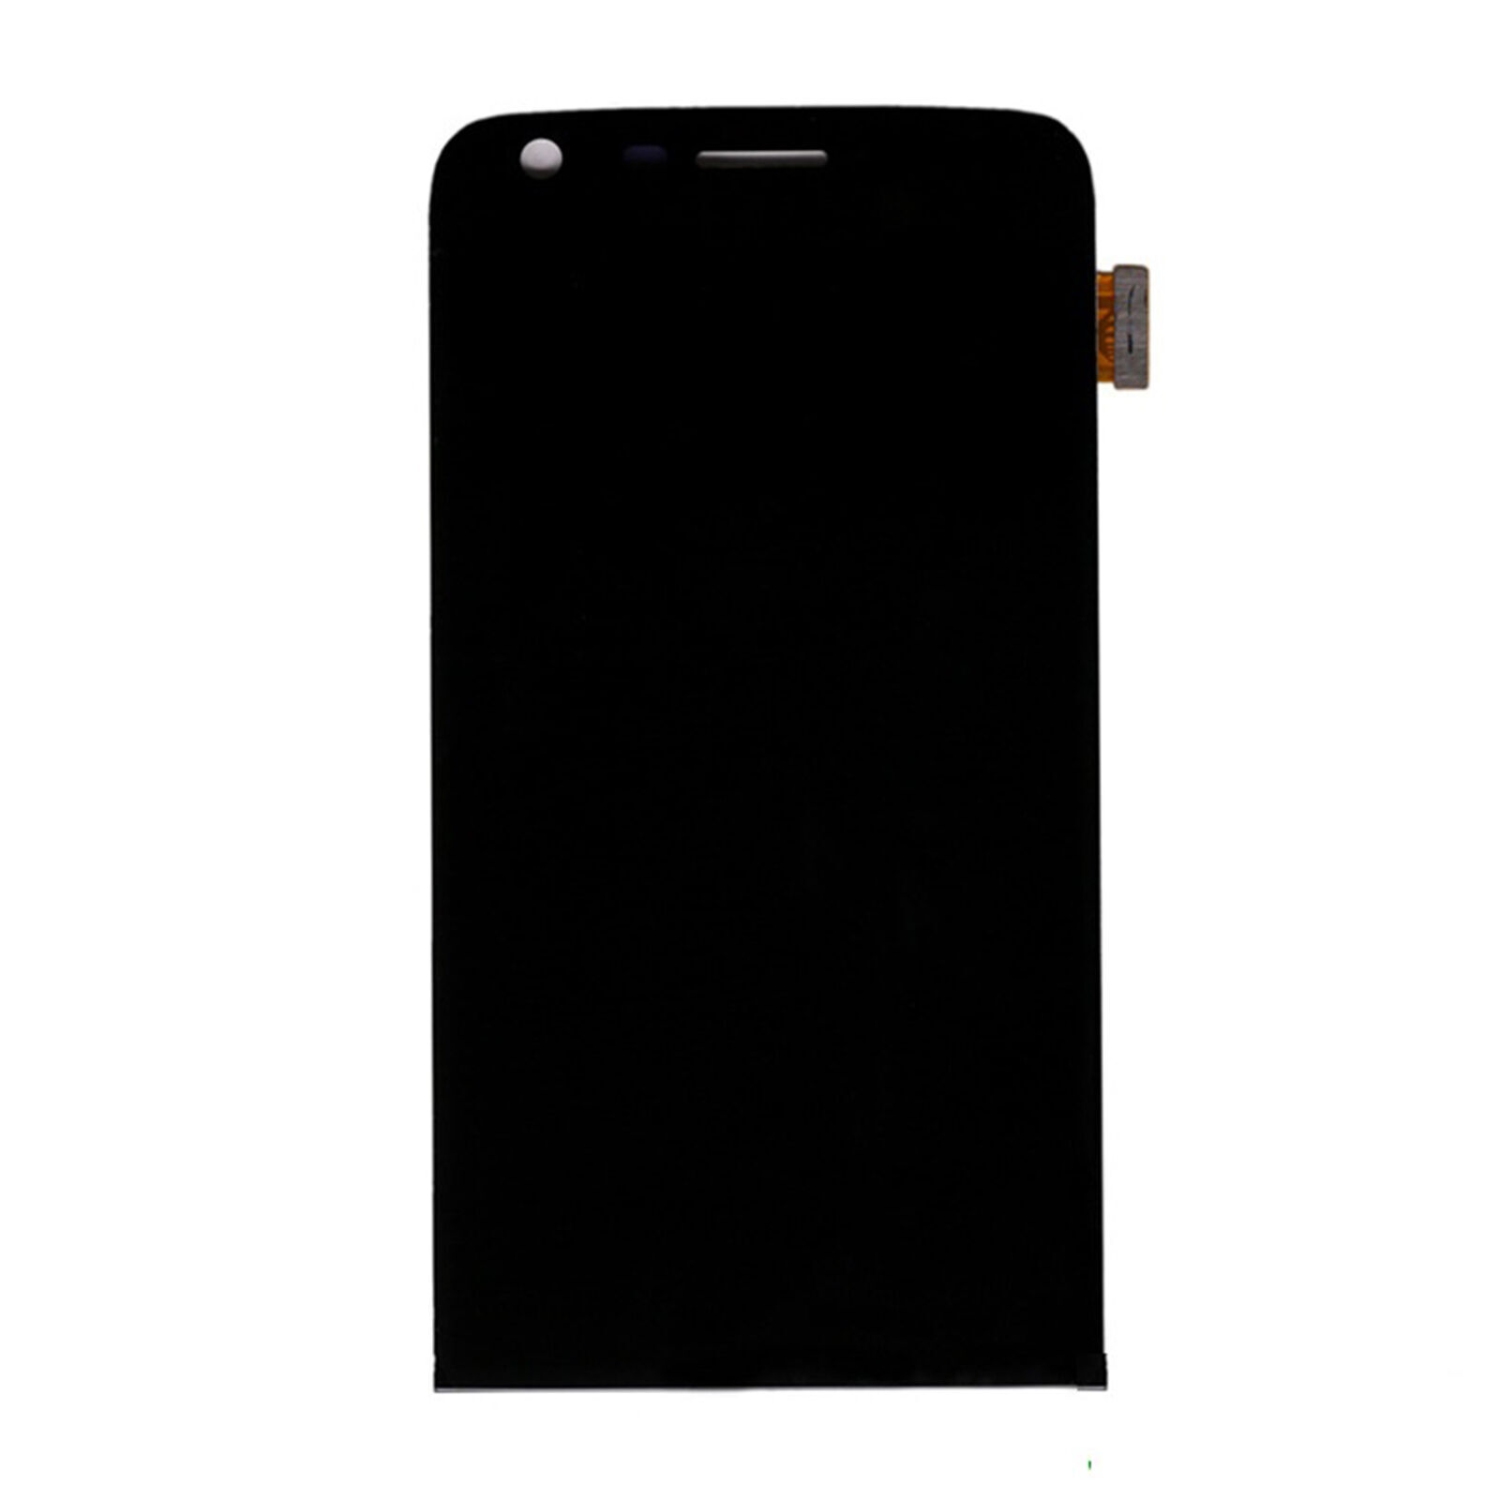 Refurbished (Good) LCD Display Touch Screen Digitizer Without Frame For LG G5